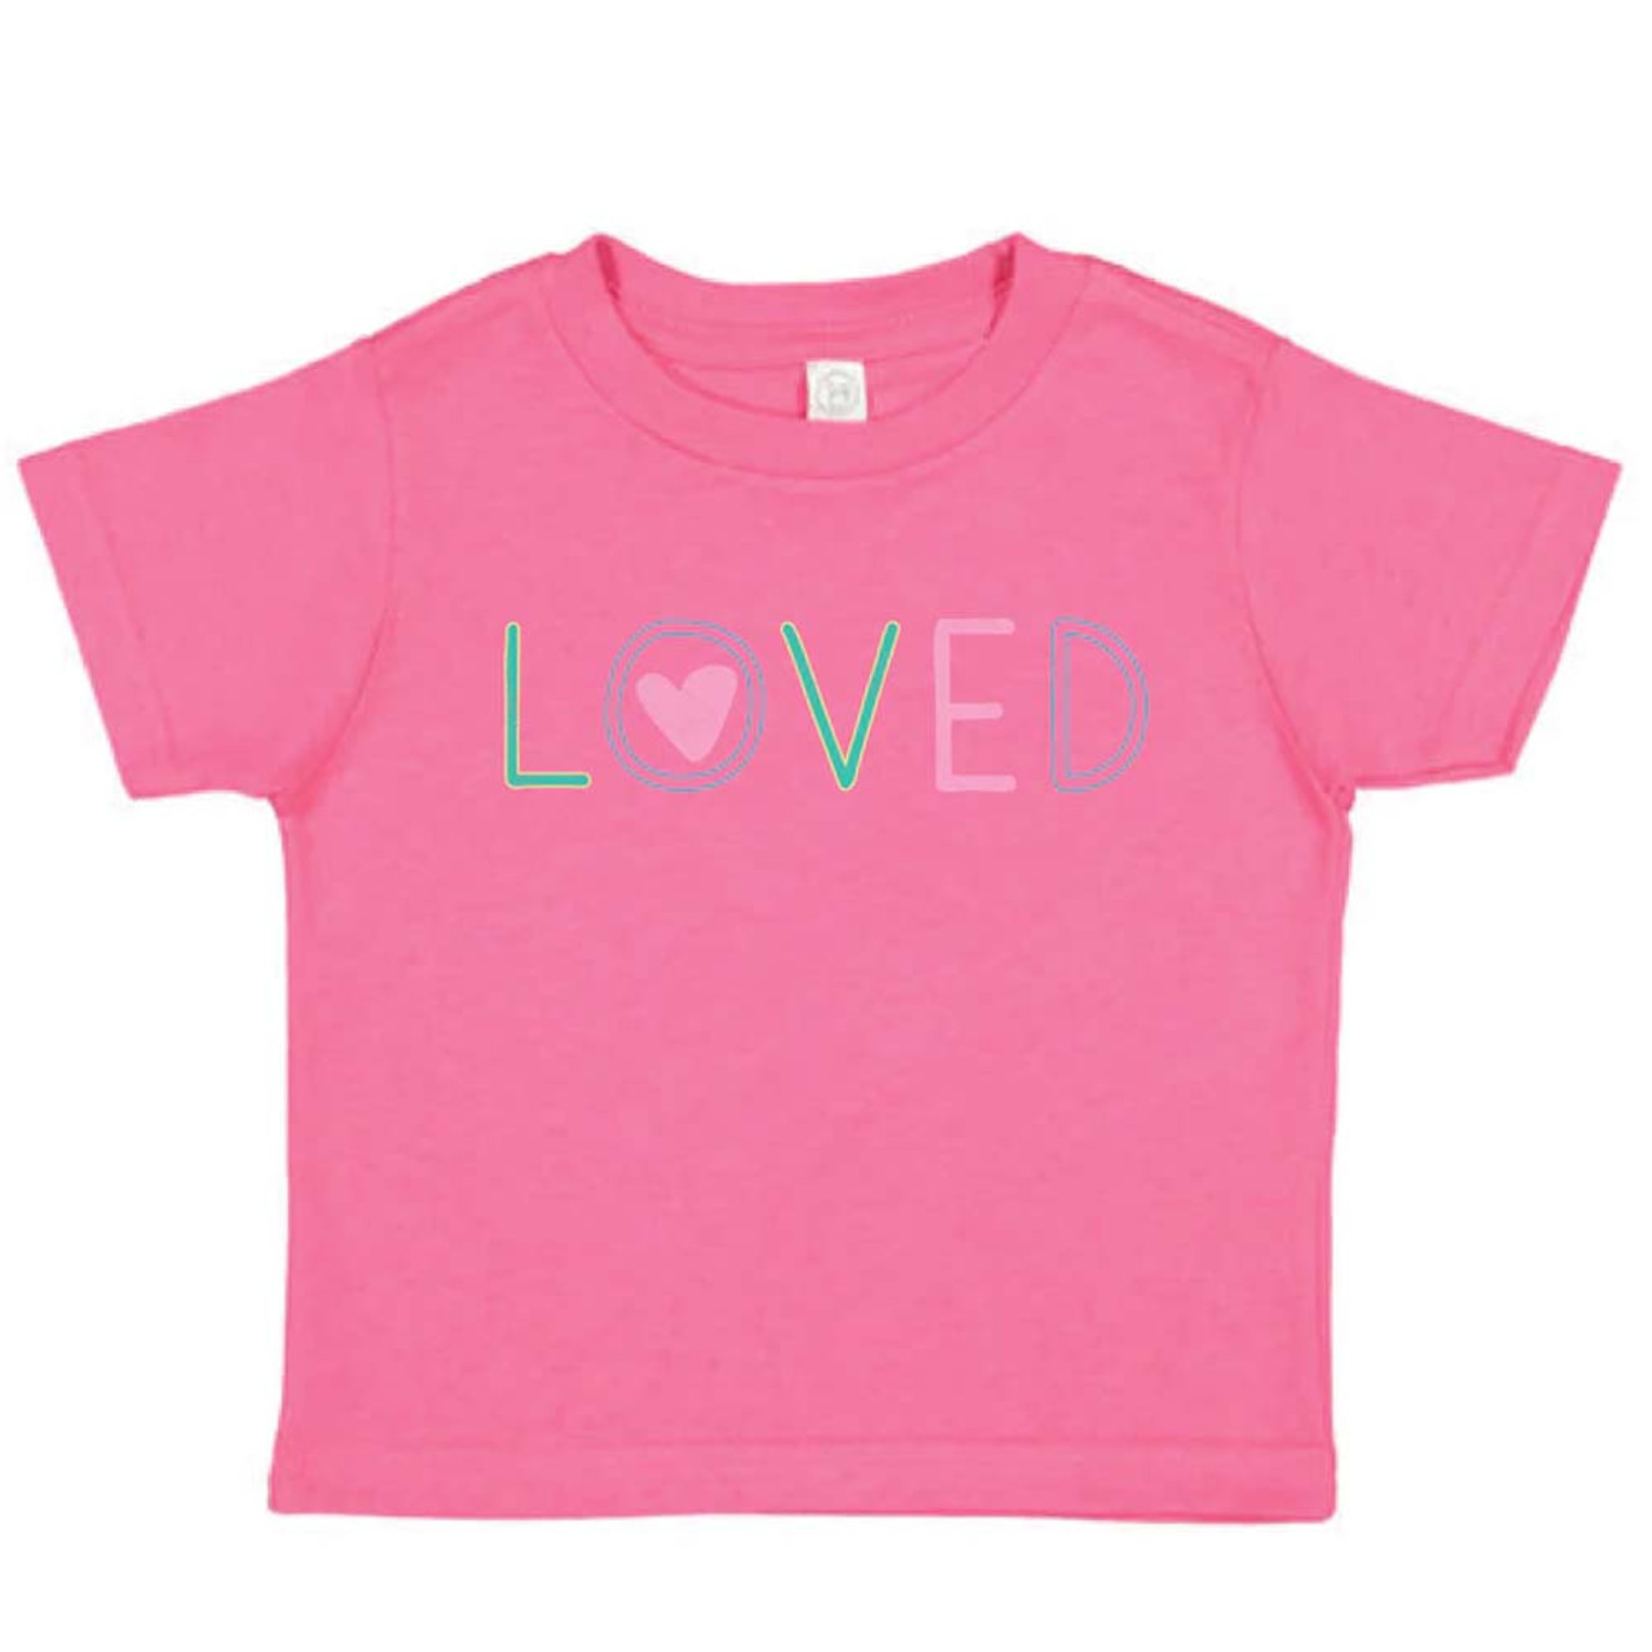 Southern Fried Cotton LOVED Toddler Tee